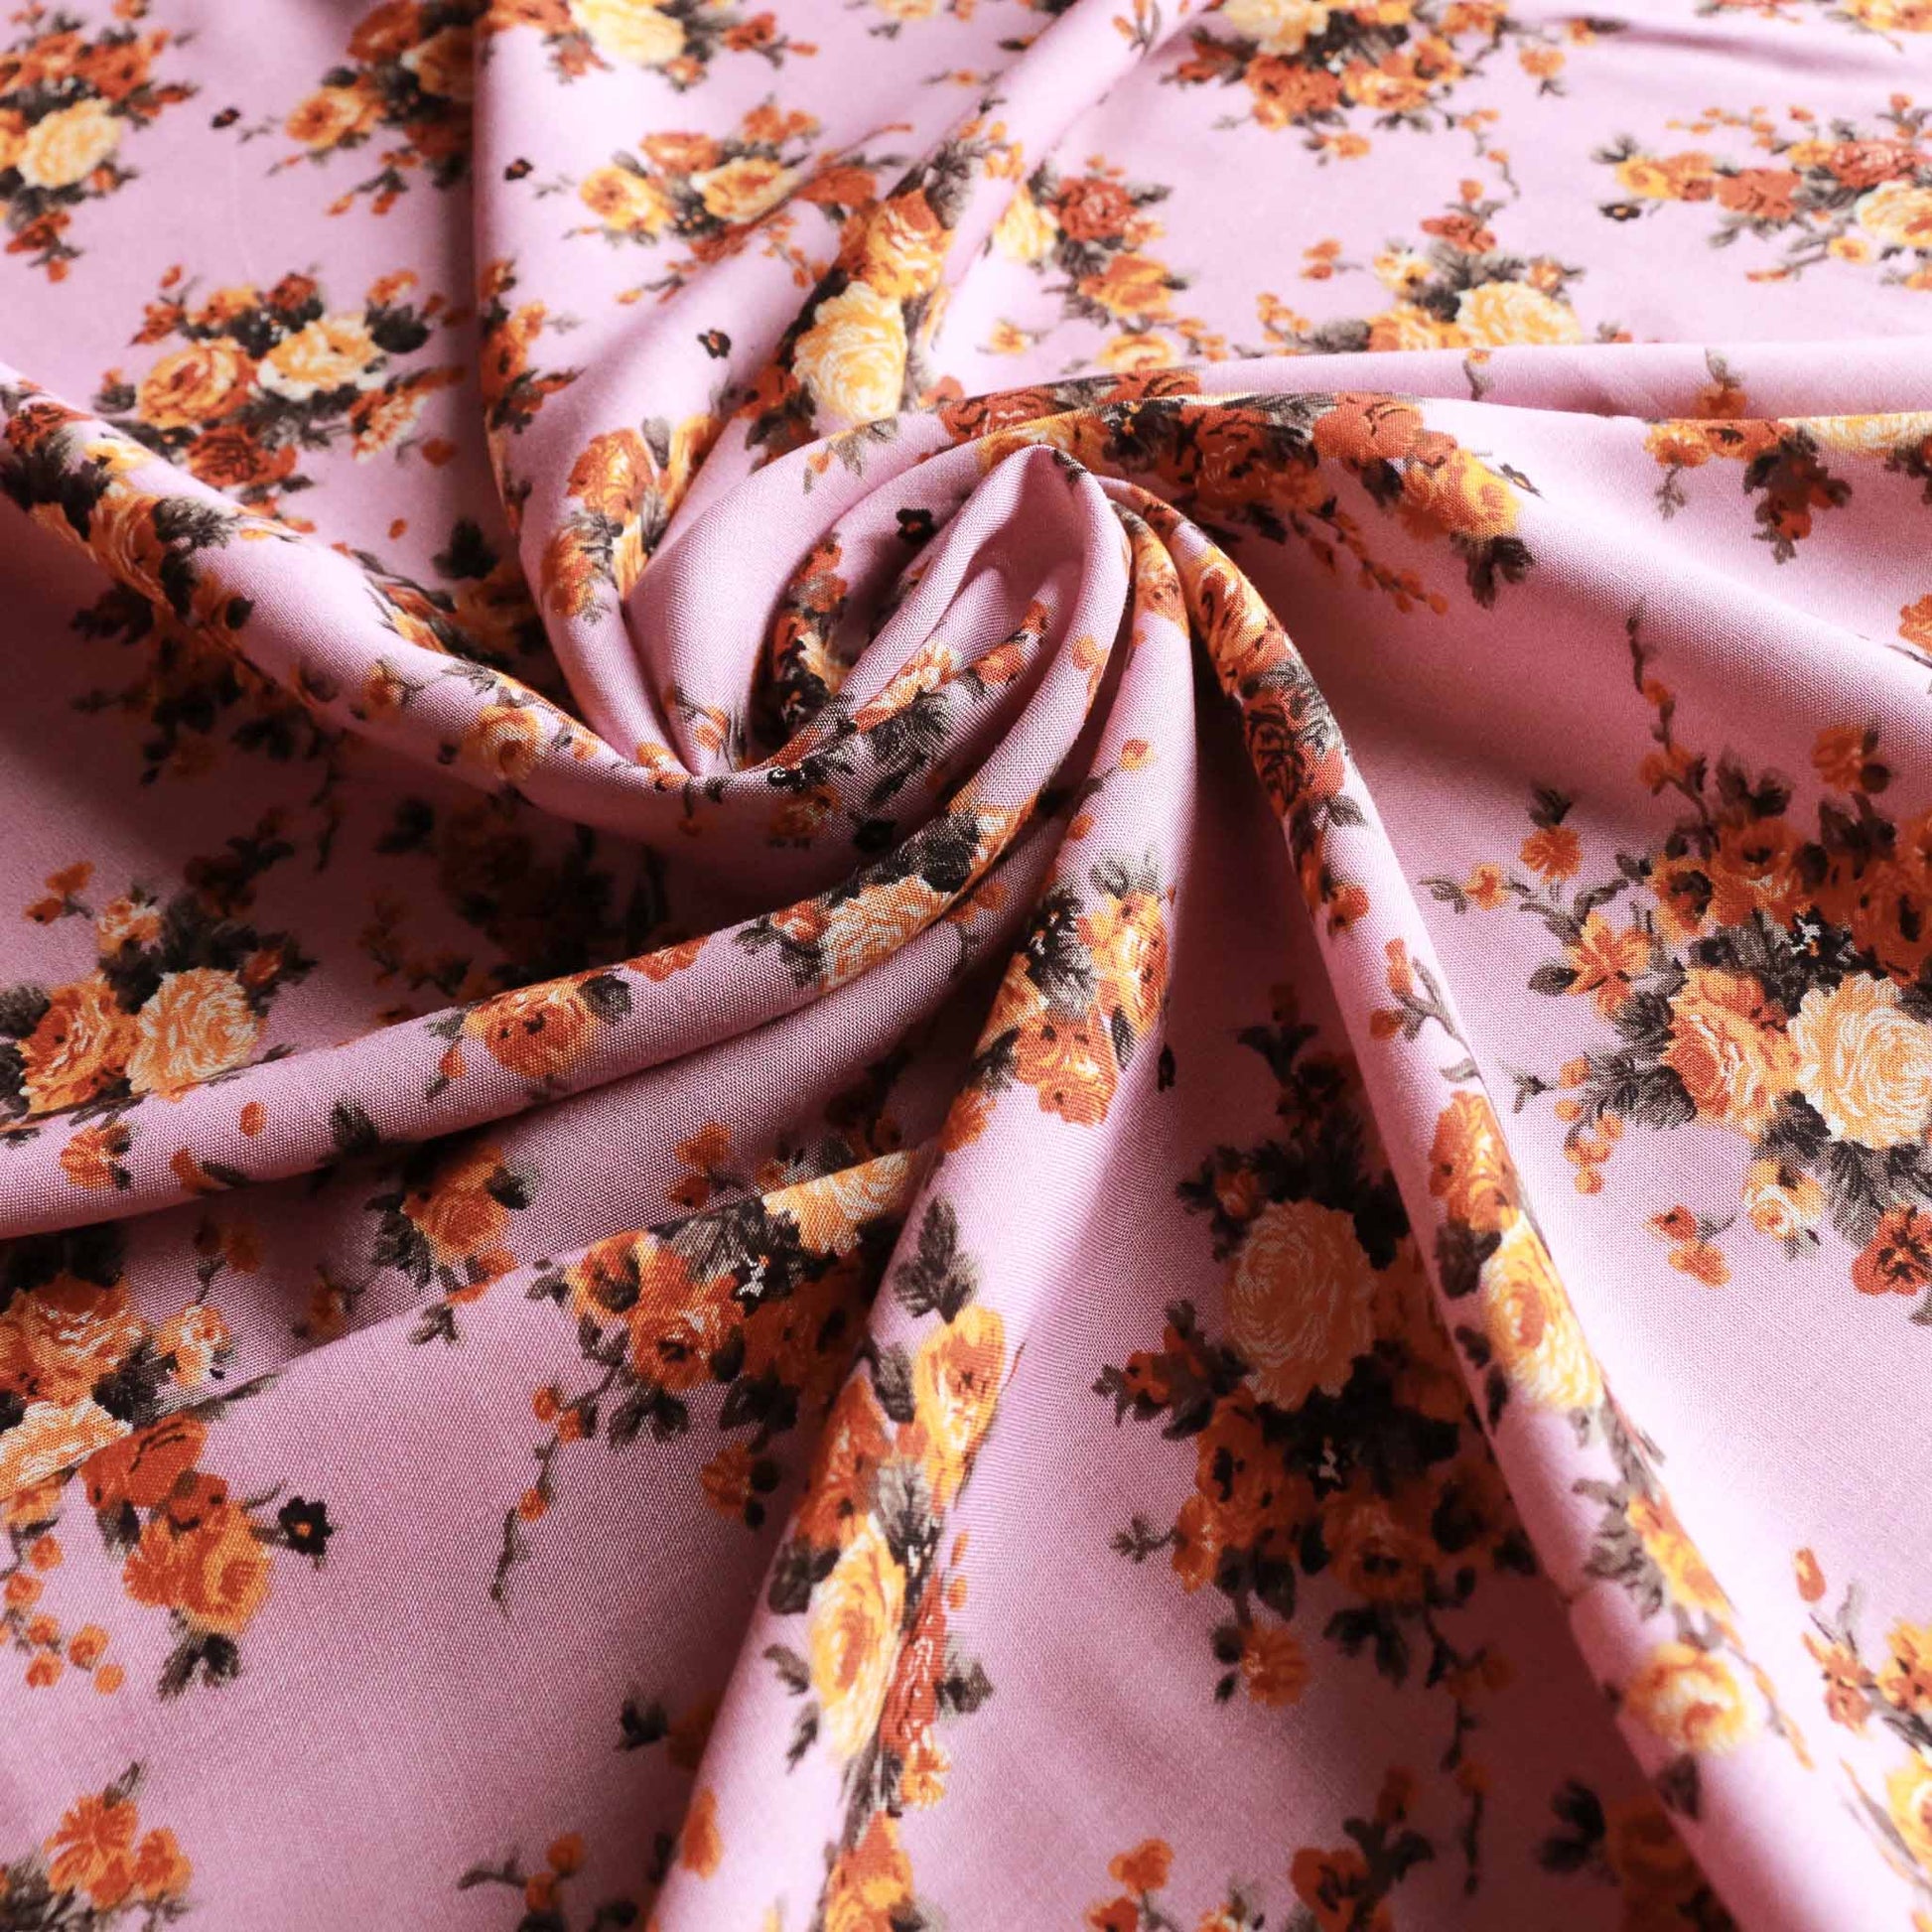 lilac viscose challis dressmaking rayon fabric with orange and yellow floral printed flower design